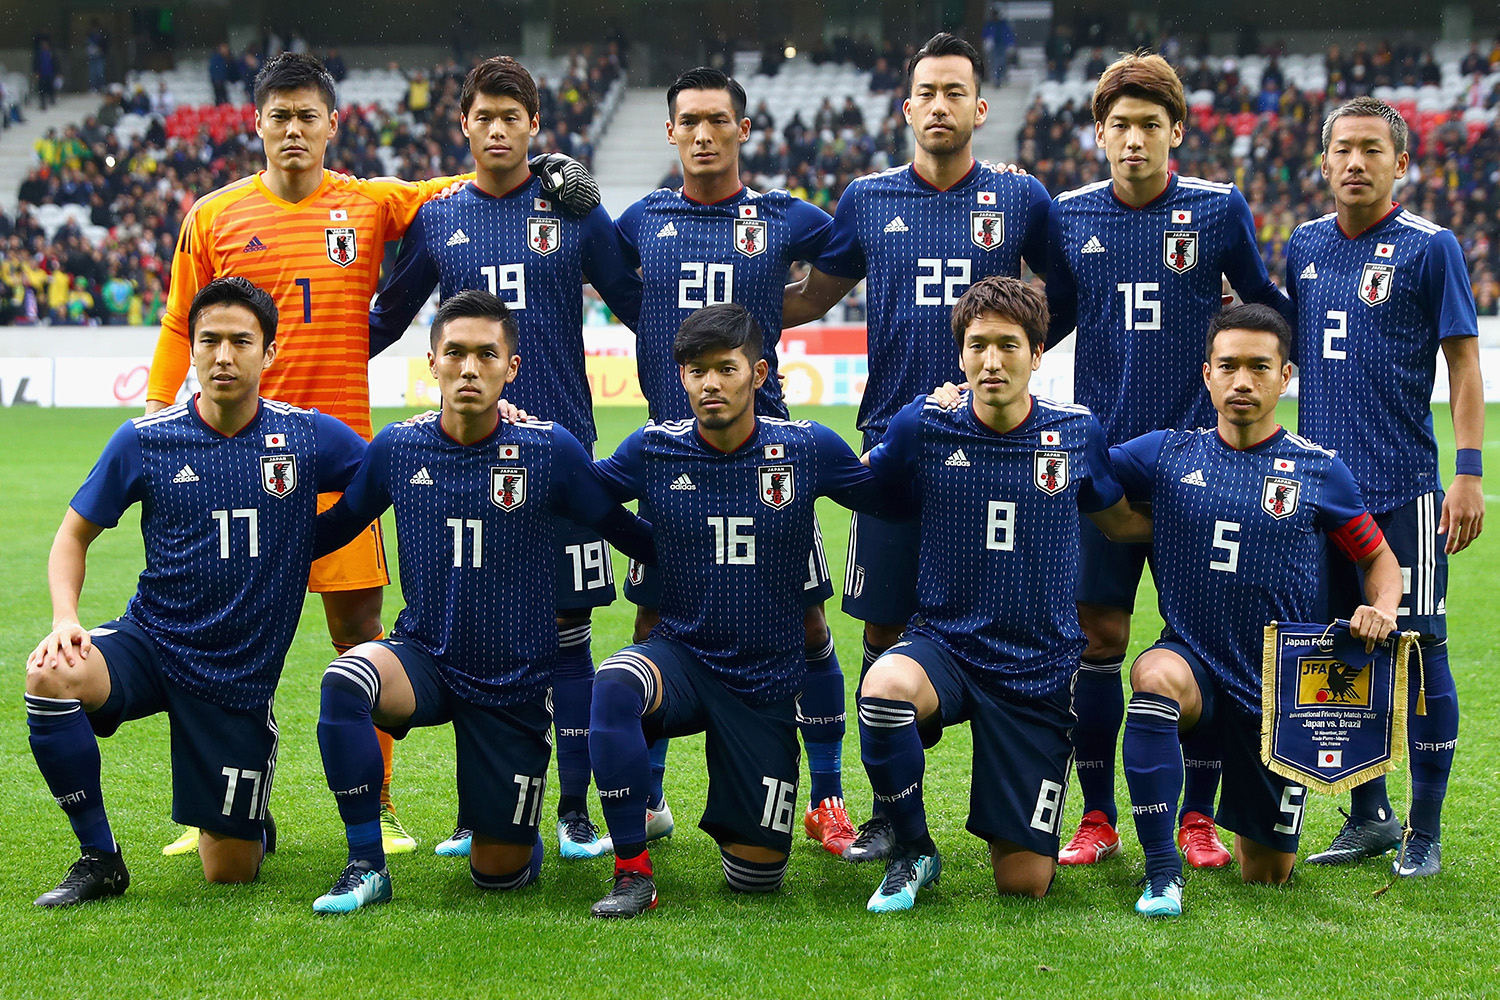 LILLE, FRANCE - NOVEMBER 10: Players of Japan pose for a team photo during the international friendly match between Brazil and Japan at Stade Pierre-Mauroy on November 10, 2017 in Lille, France. (Photo by Clive Rose/Getty Images)